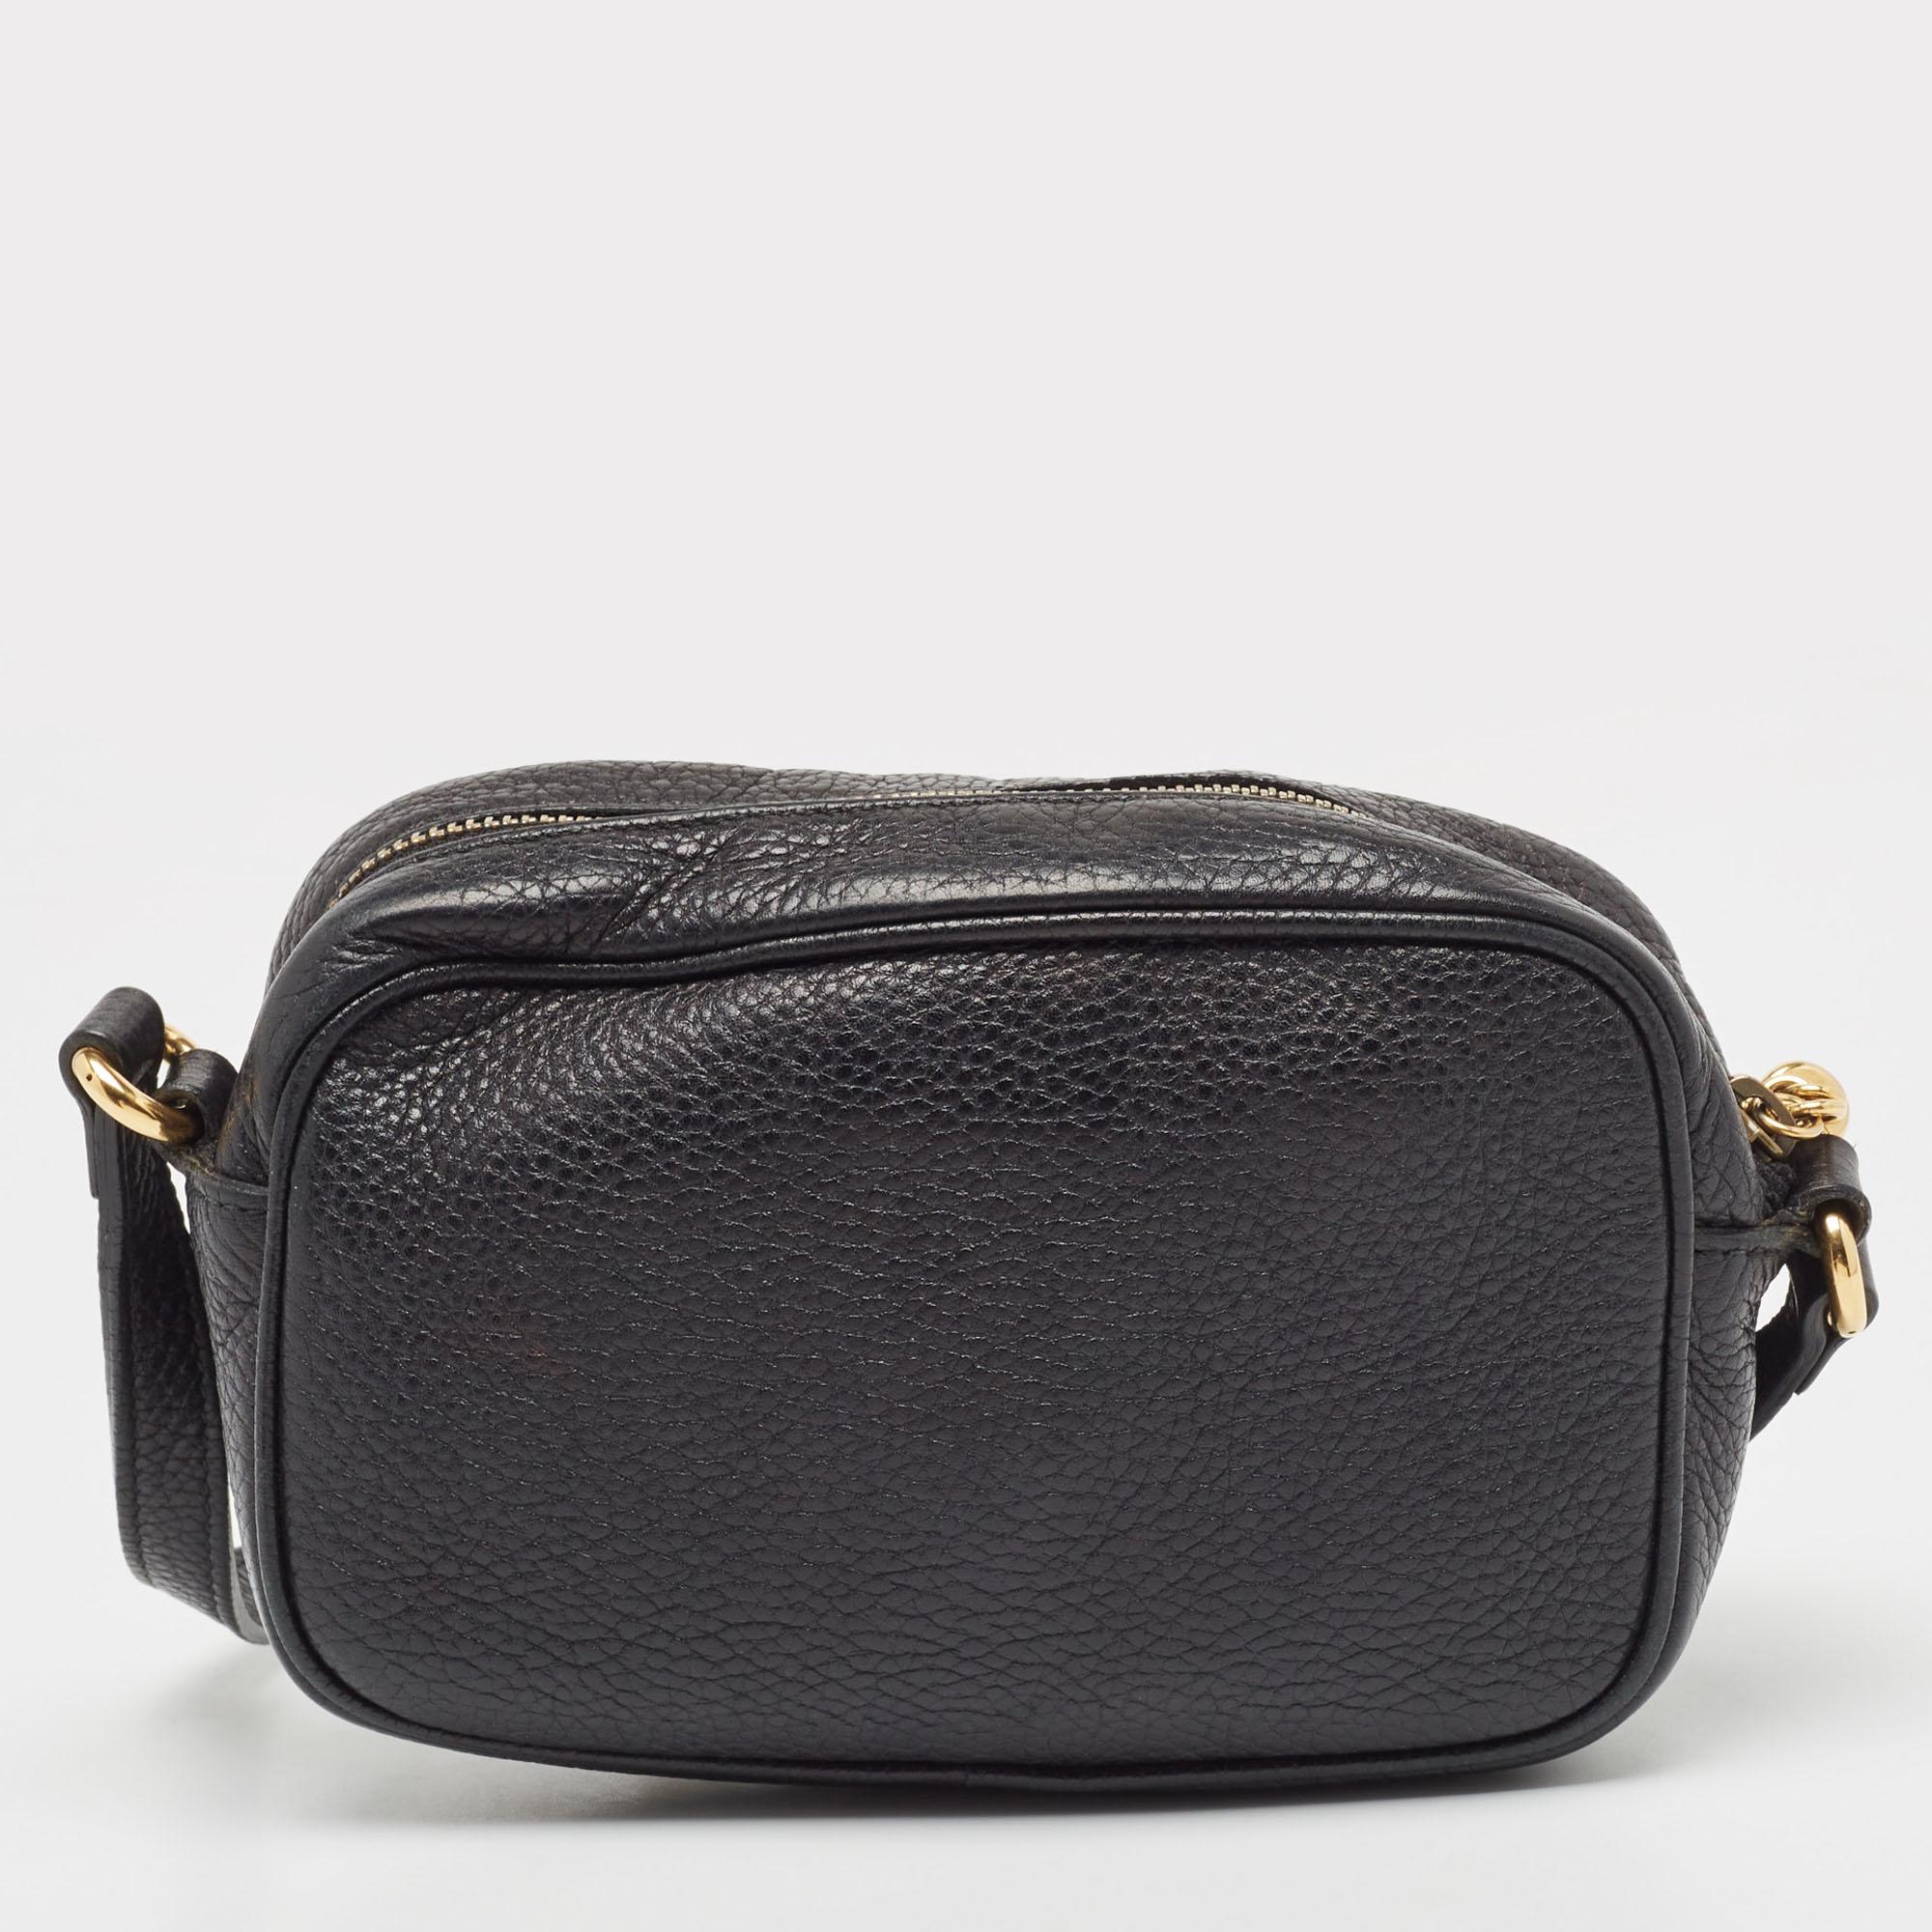 Gucci's expertise in creating noteworthy designs is evident in this Soho bag. Made from leather, it gets a luxe update with a brand motif on the front and displays a shoulder strap. The zipper closure at the top is equipped with a tassel-detailed